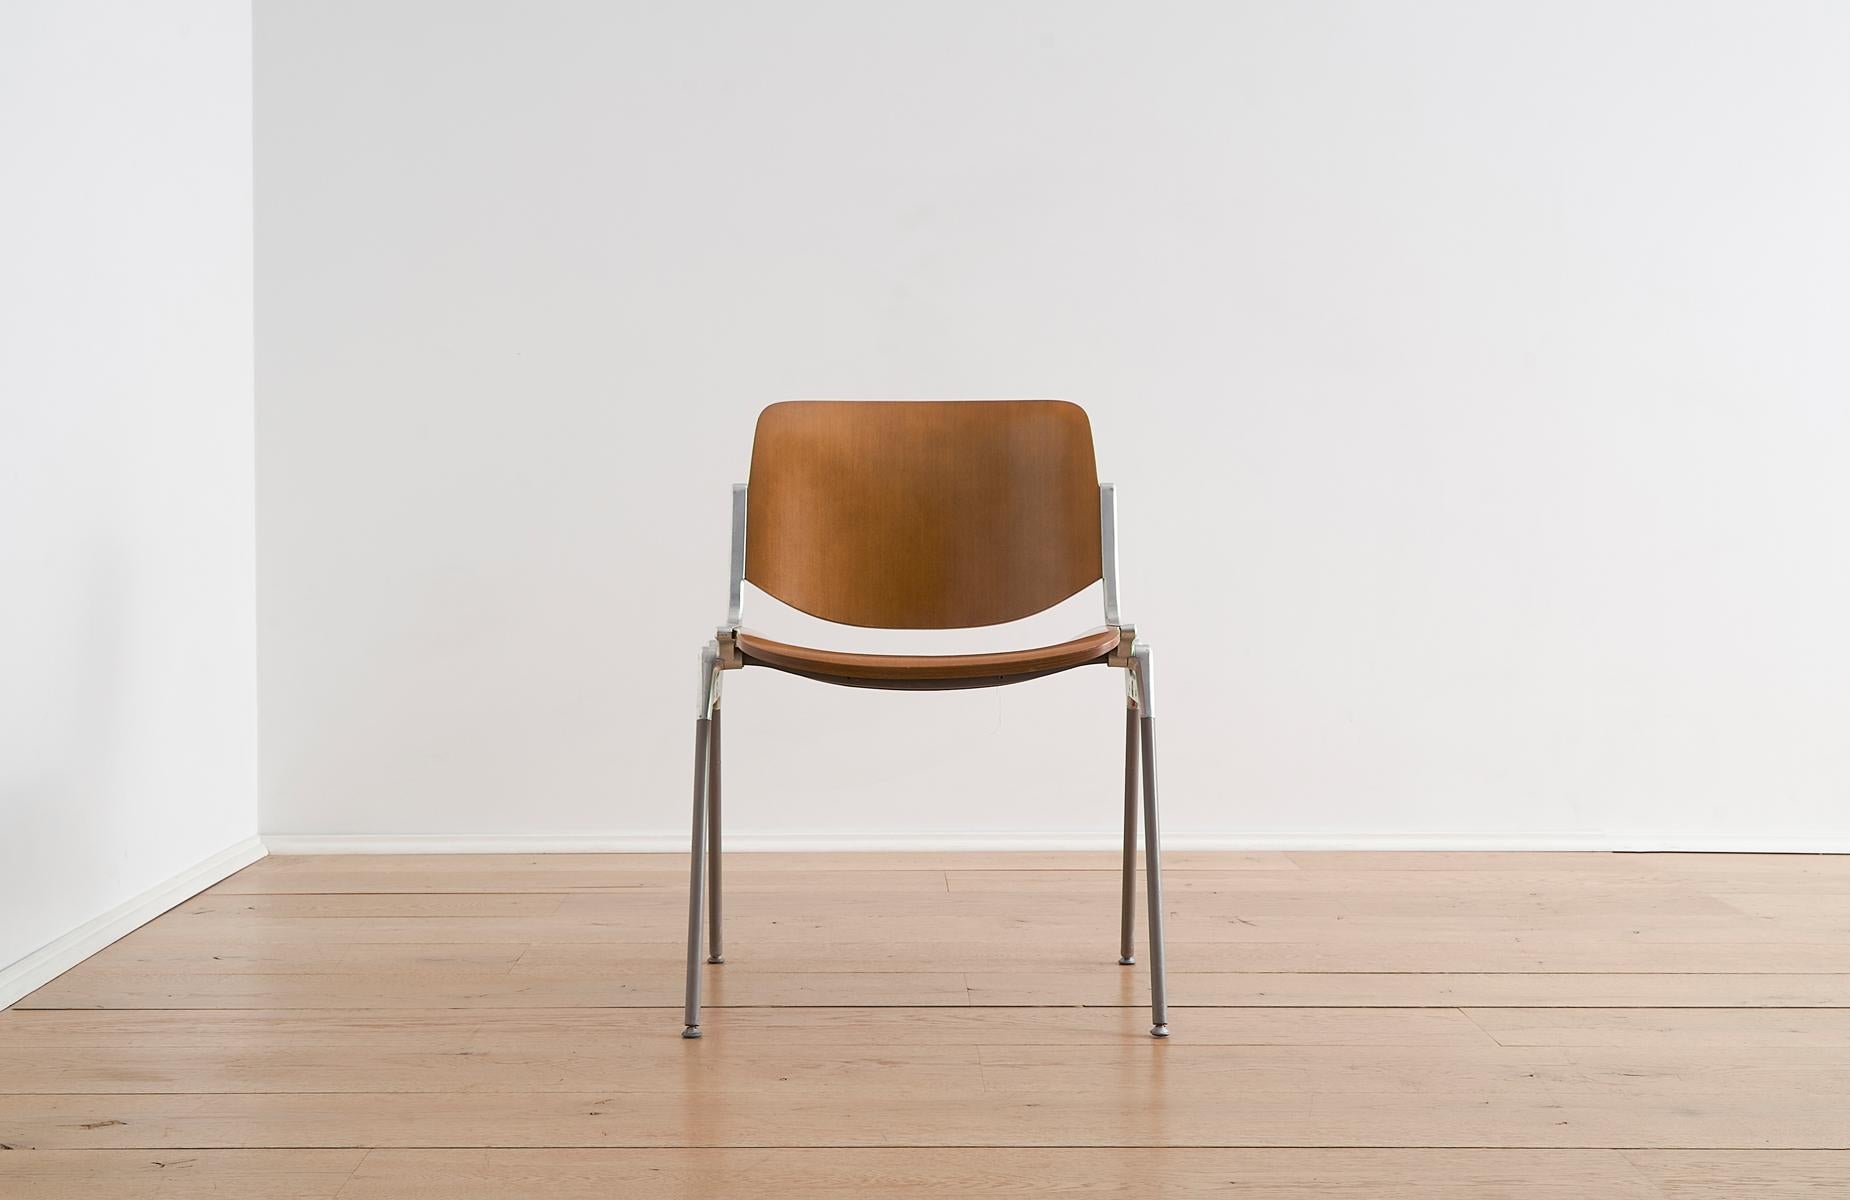 Designed in 1965 by Giancarlo Piretti, the famed mind behind other evocative seats such as the Plia and Plona folding chairs, the DSC 106 is perhaps one of the most famous and popular chairs, with displays present in countless exhibits throughout